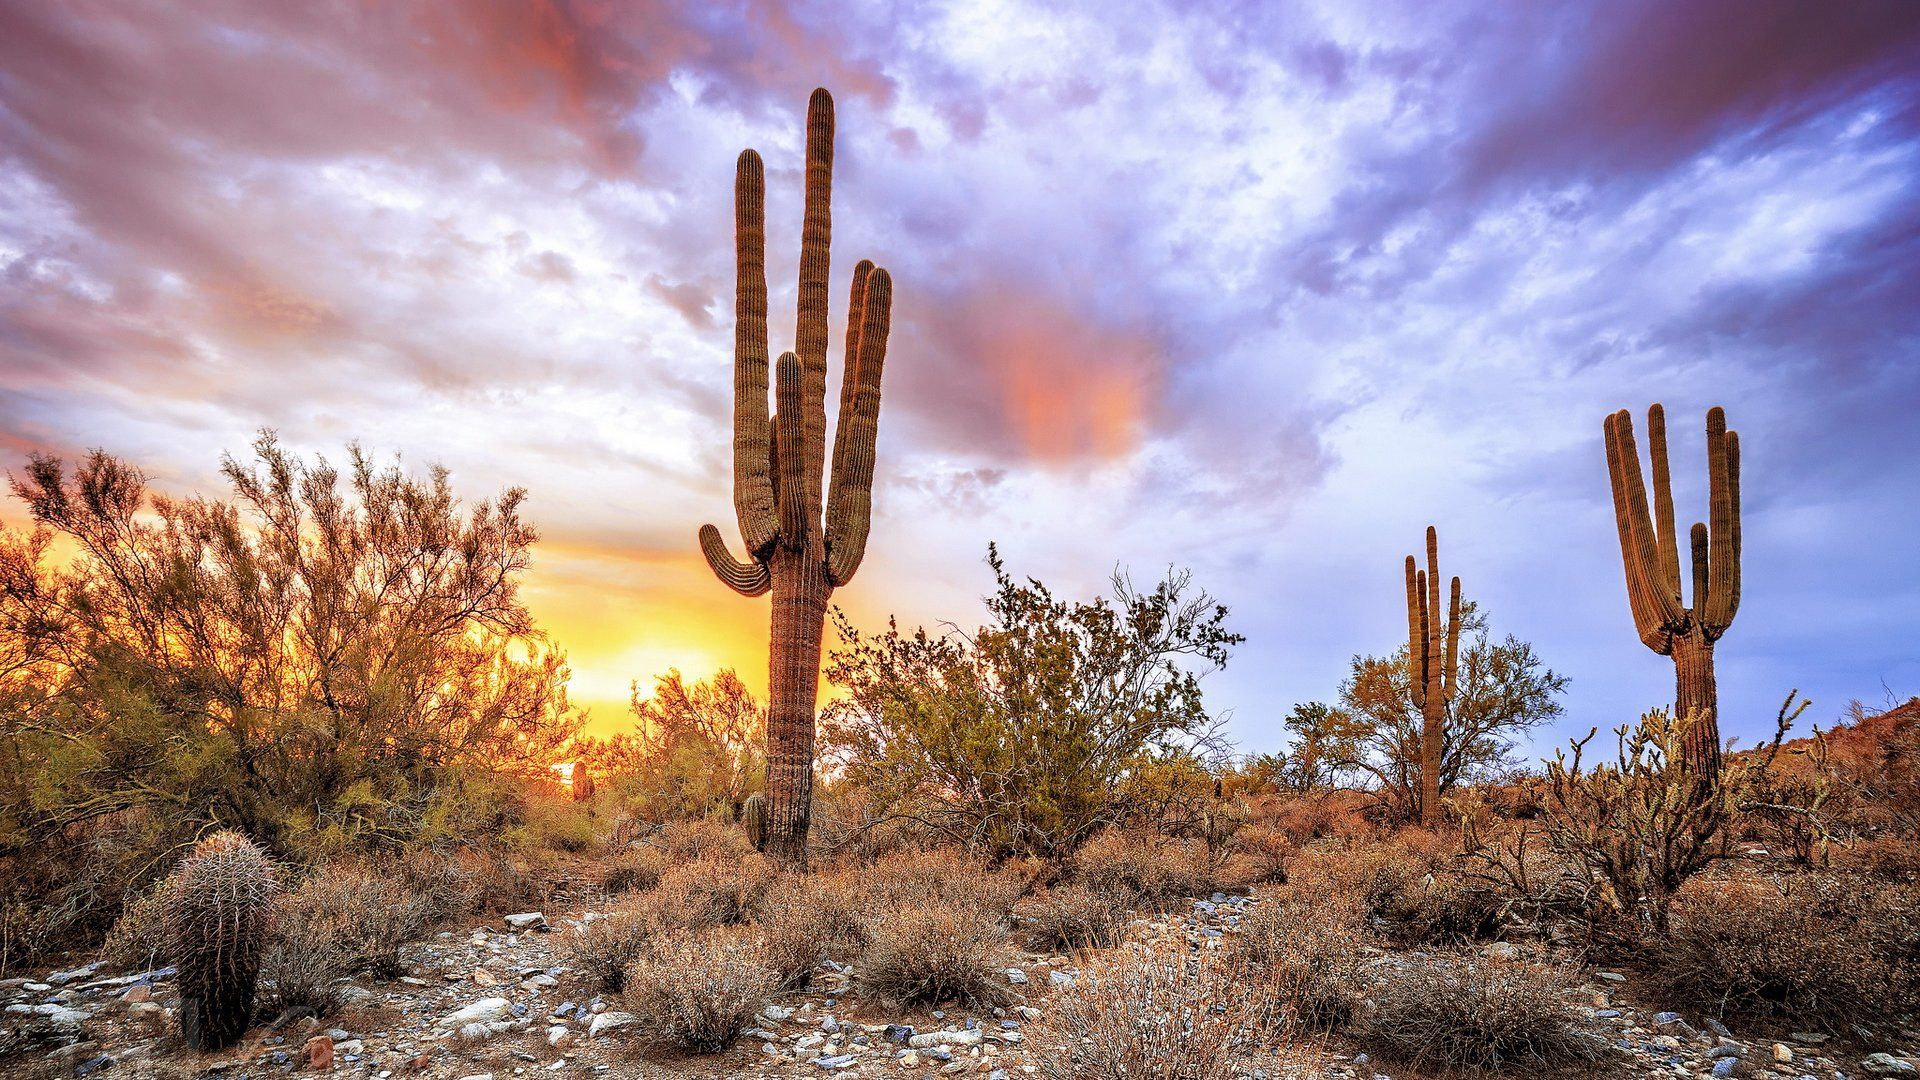 A desert landscape with cacti in the foreground and a sunset in the background. - Desert